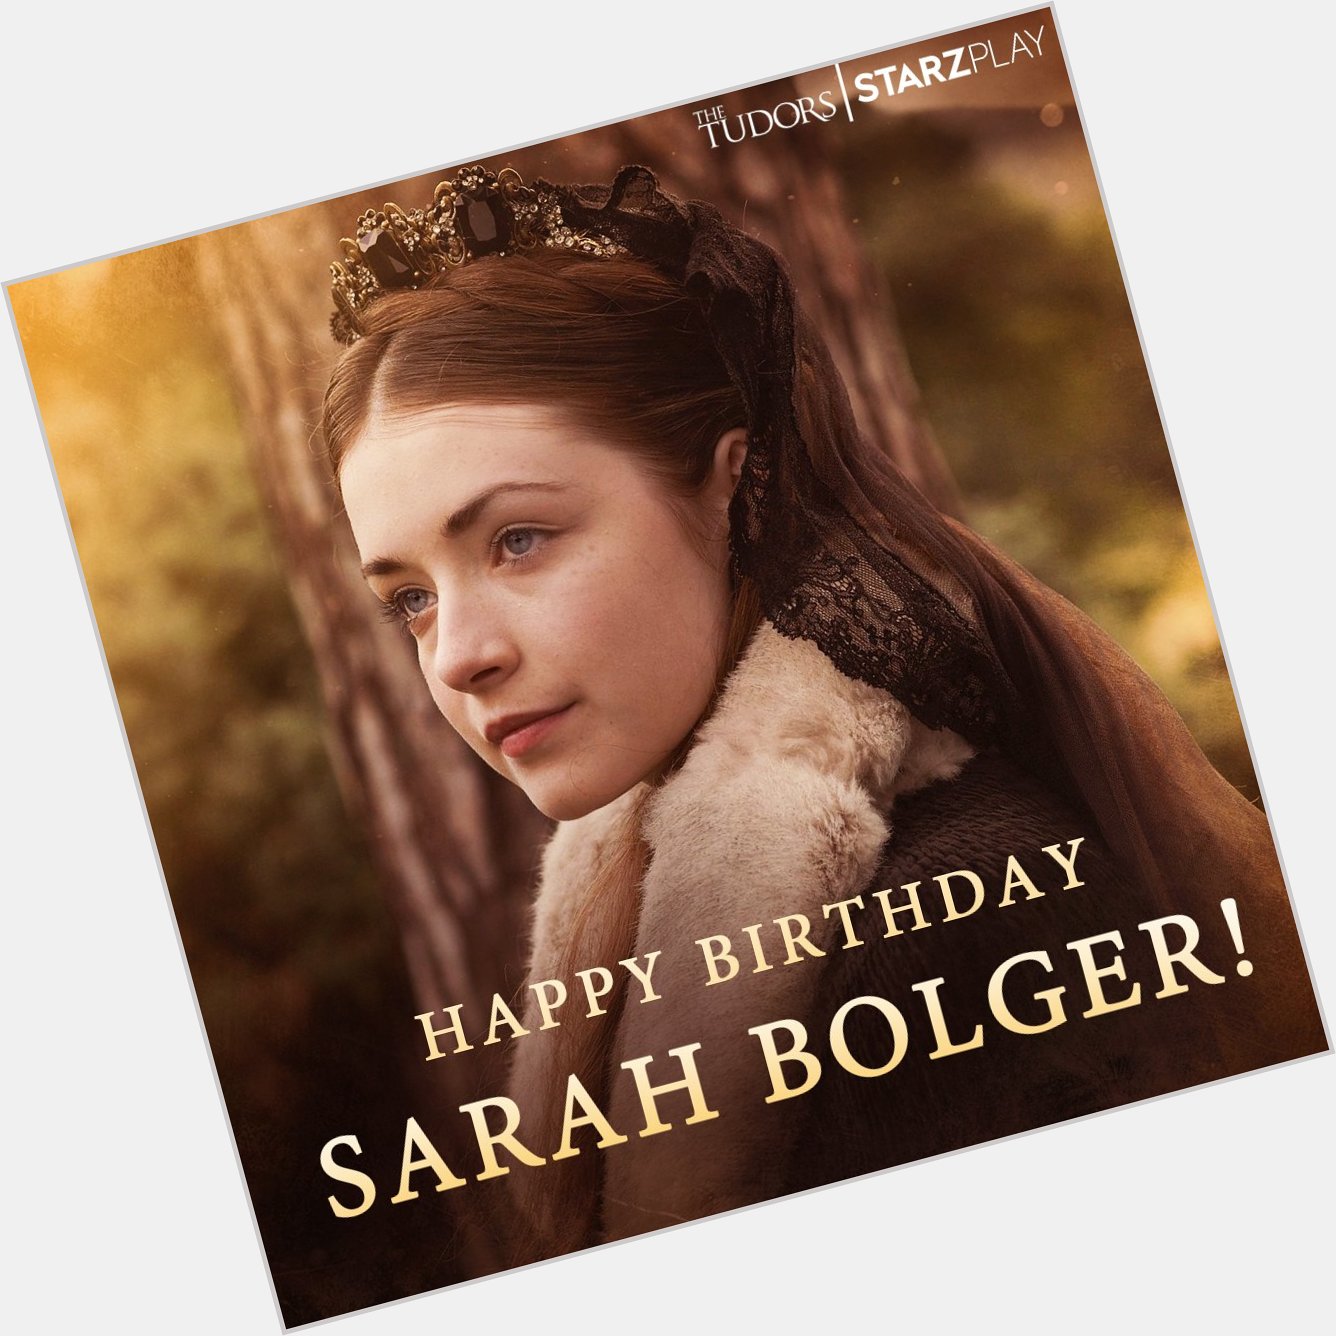 Happy Birthday, Sarah Bolger. Hope you get treated like a queen today!  